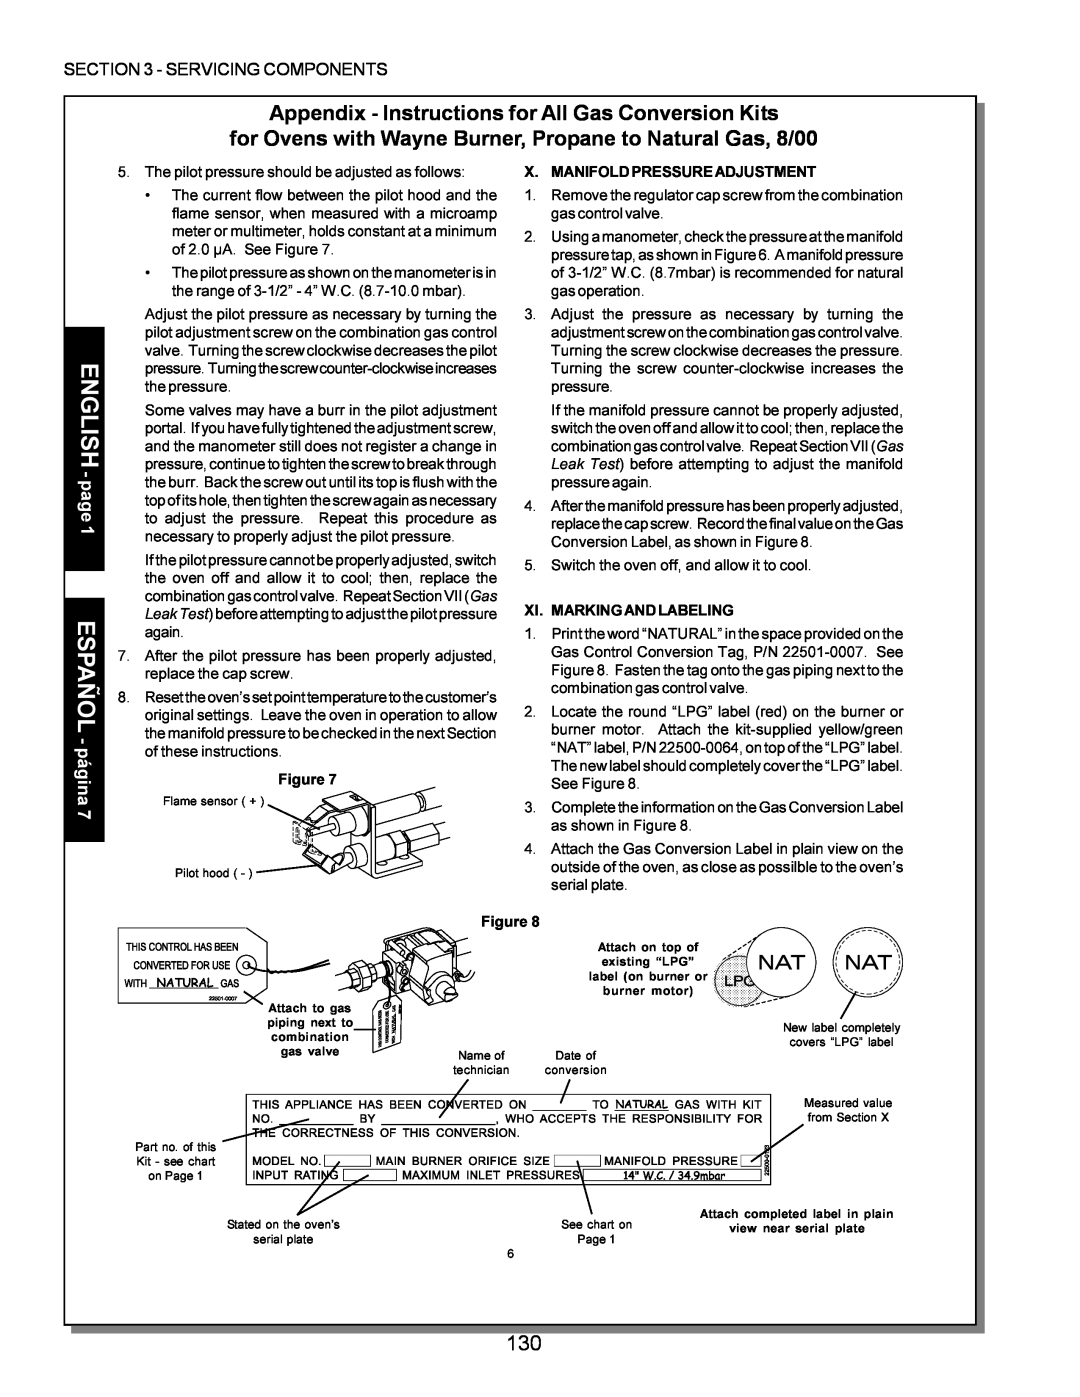 Middleby Marshall PS224 PS310, PS570, PS360, PS200 Appendix - Instructions for All Gas Conversion Kits, Servicing Components 